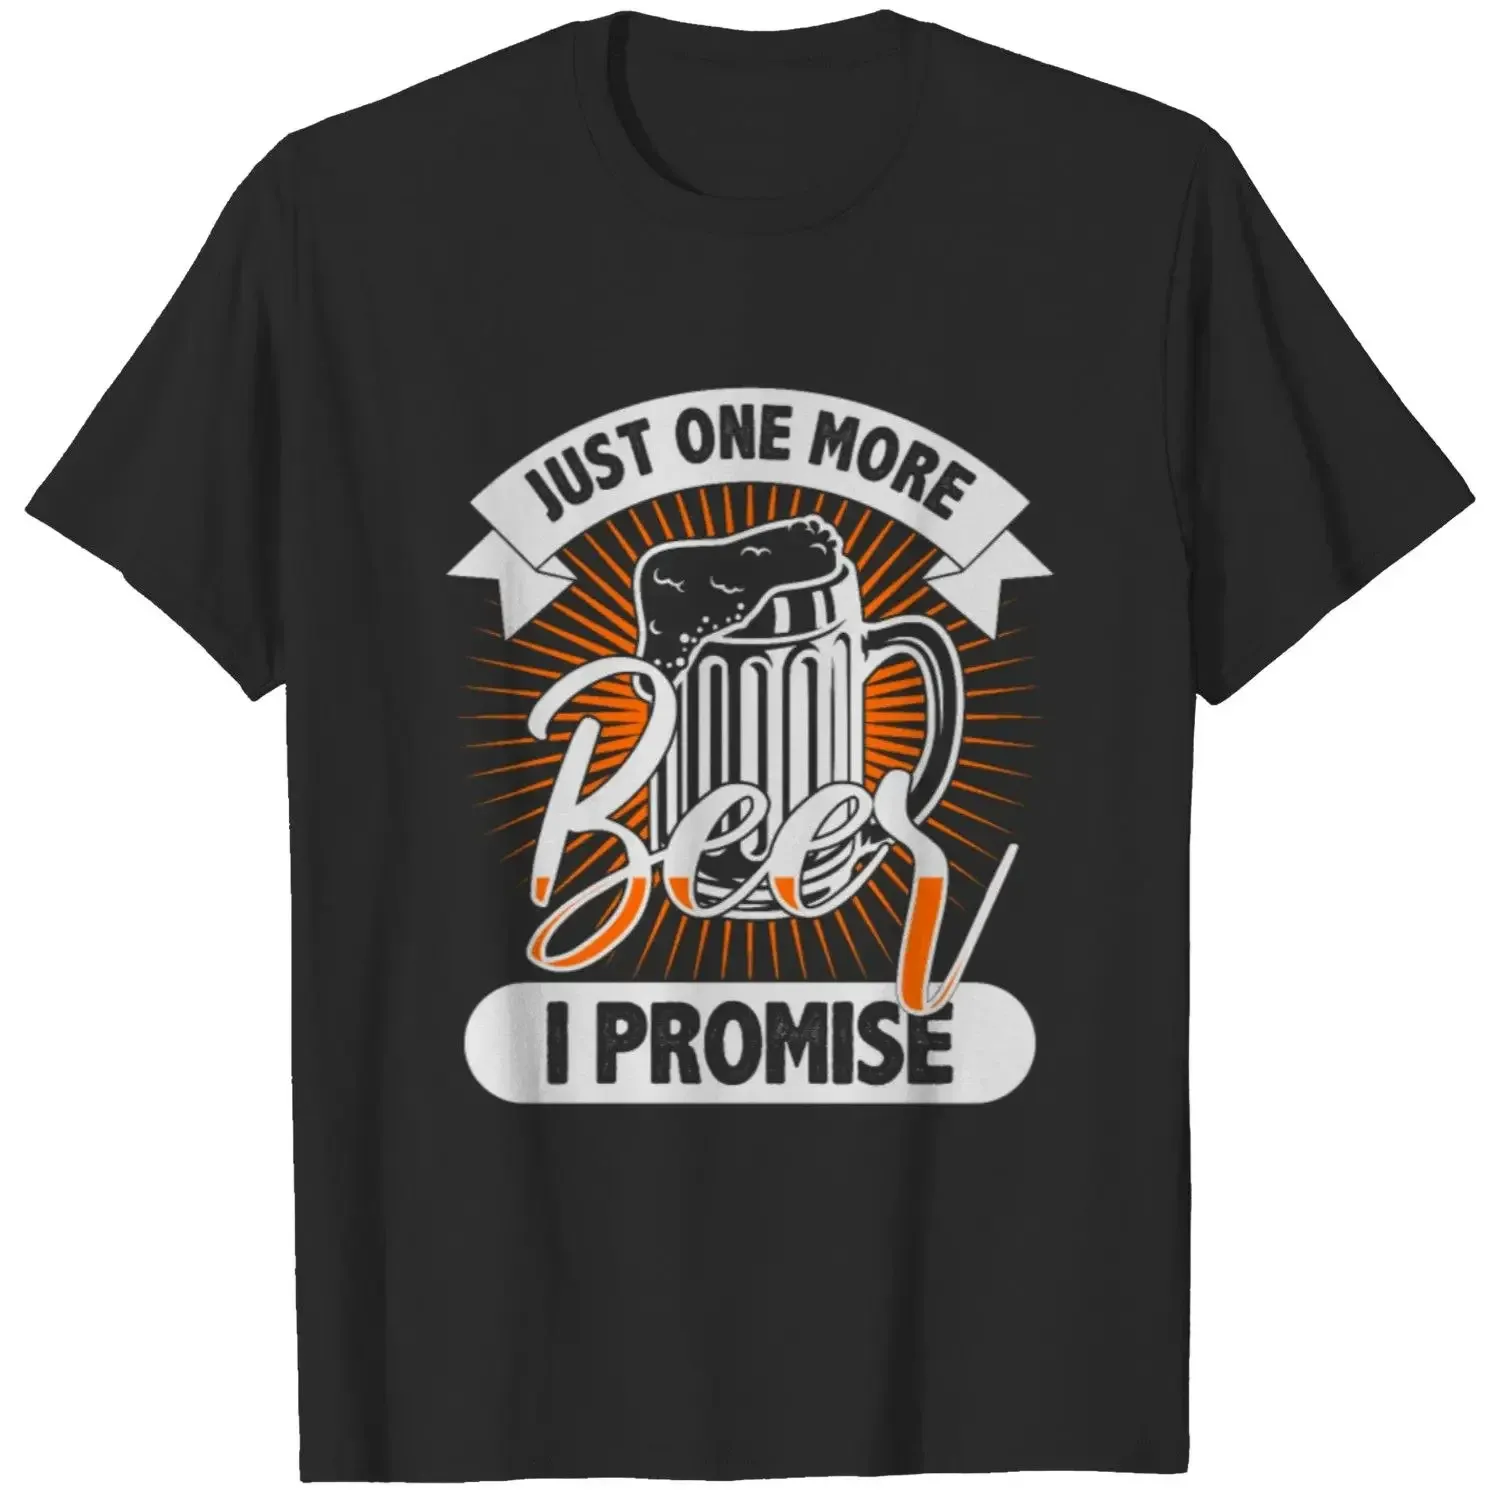 Just One More Beer I Promise T-shirt Funny cloth Cute Lager Beer Graphic Casual Unisex Crew Neck T Shirt